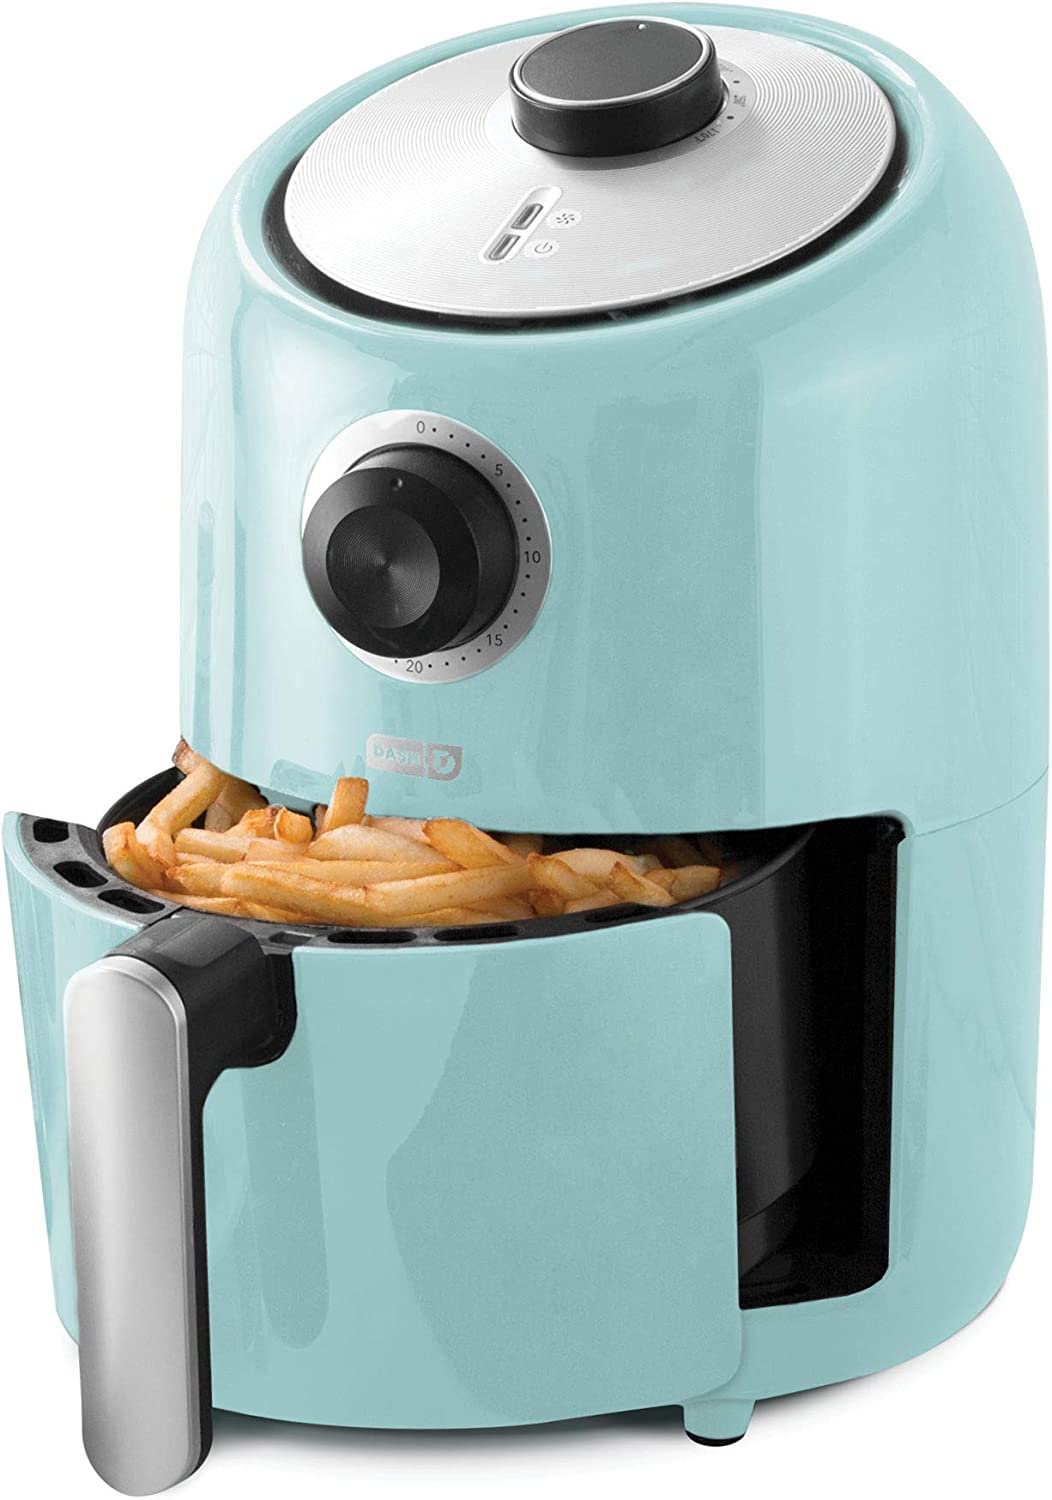 DASH Compact Air Fryer Oven Cooker with Temperature Control, Non-stick Fry Basket, Recipe Guide + Auto Shut off Feature